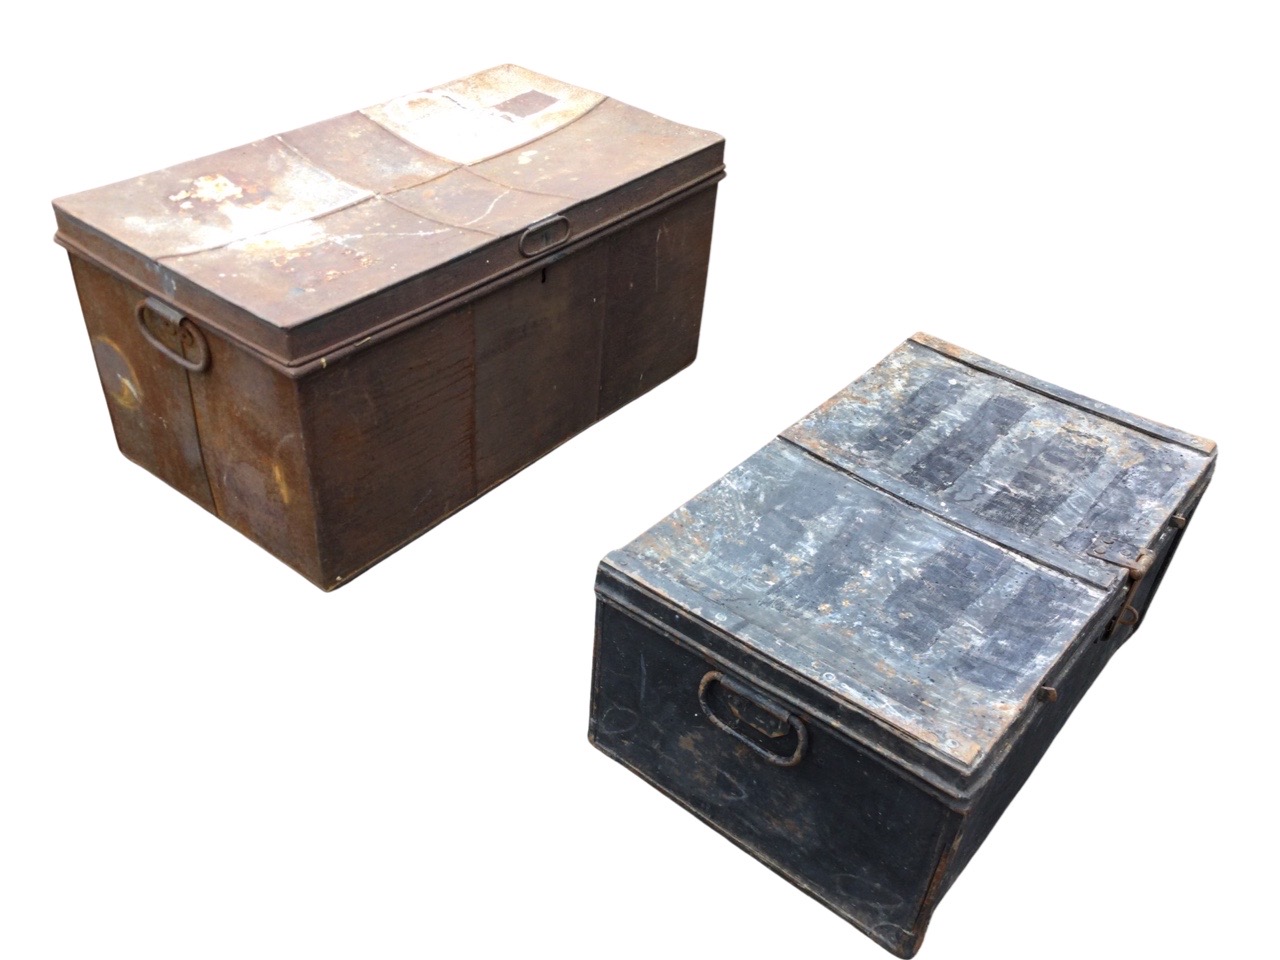 A rectangular tin trunk with zinc lined interior; and another metal trunk dated 1942, with